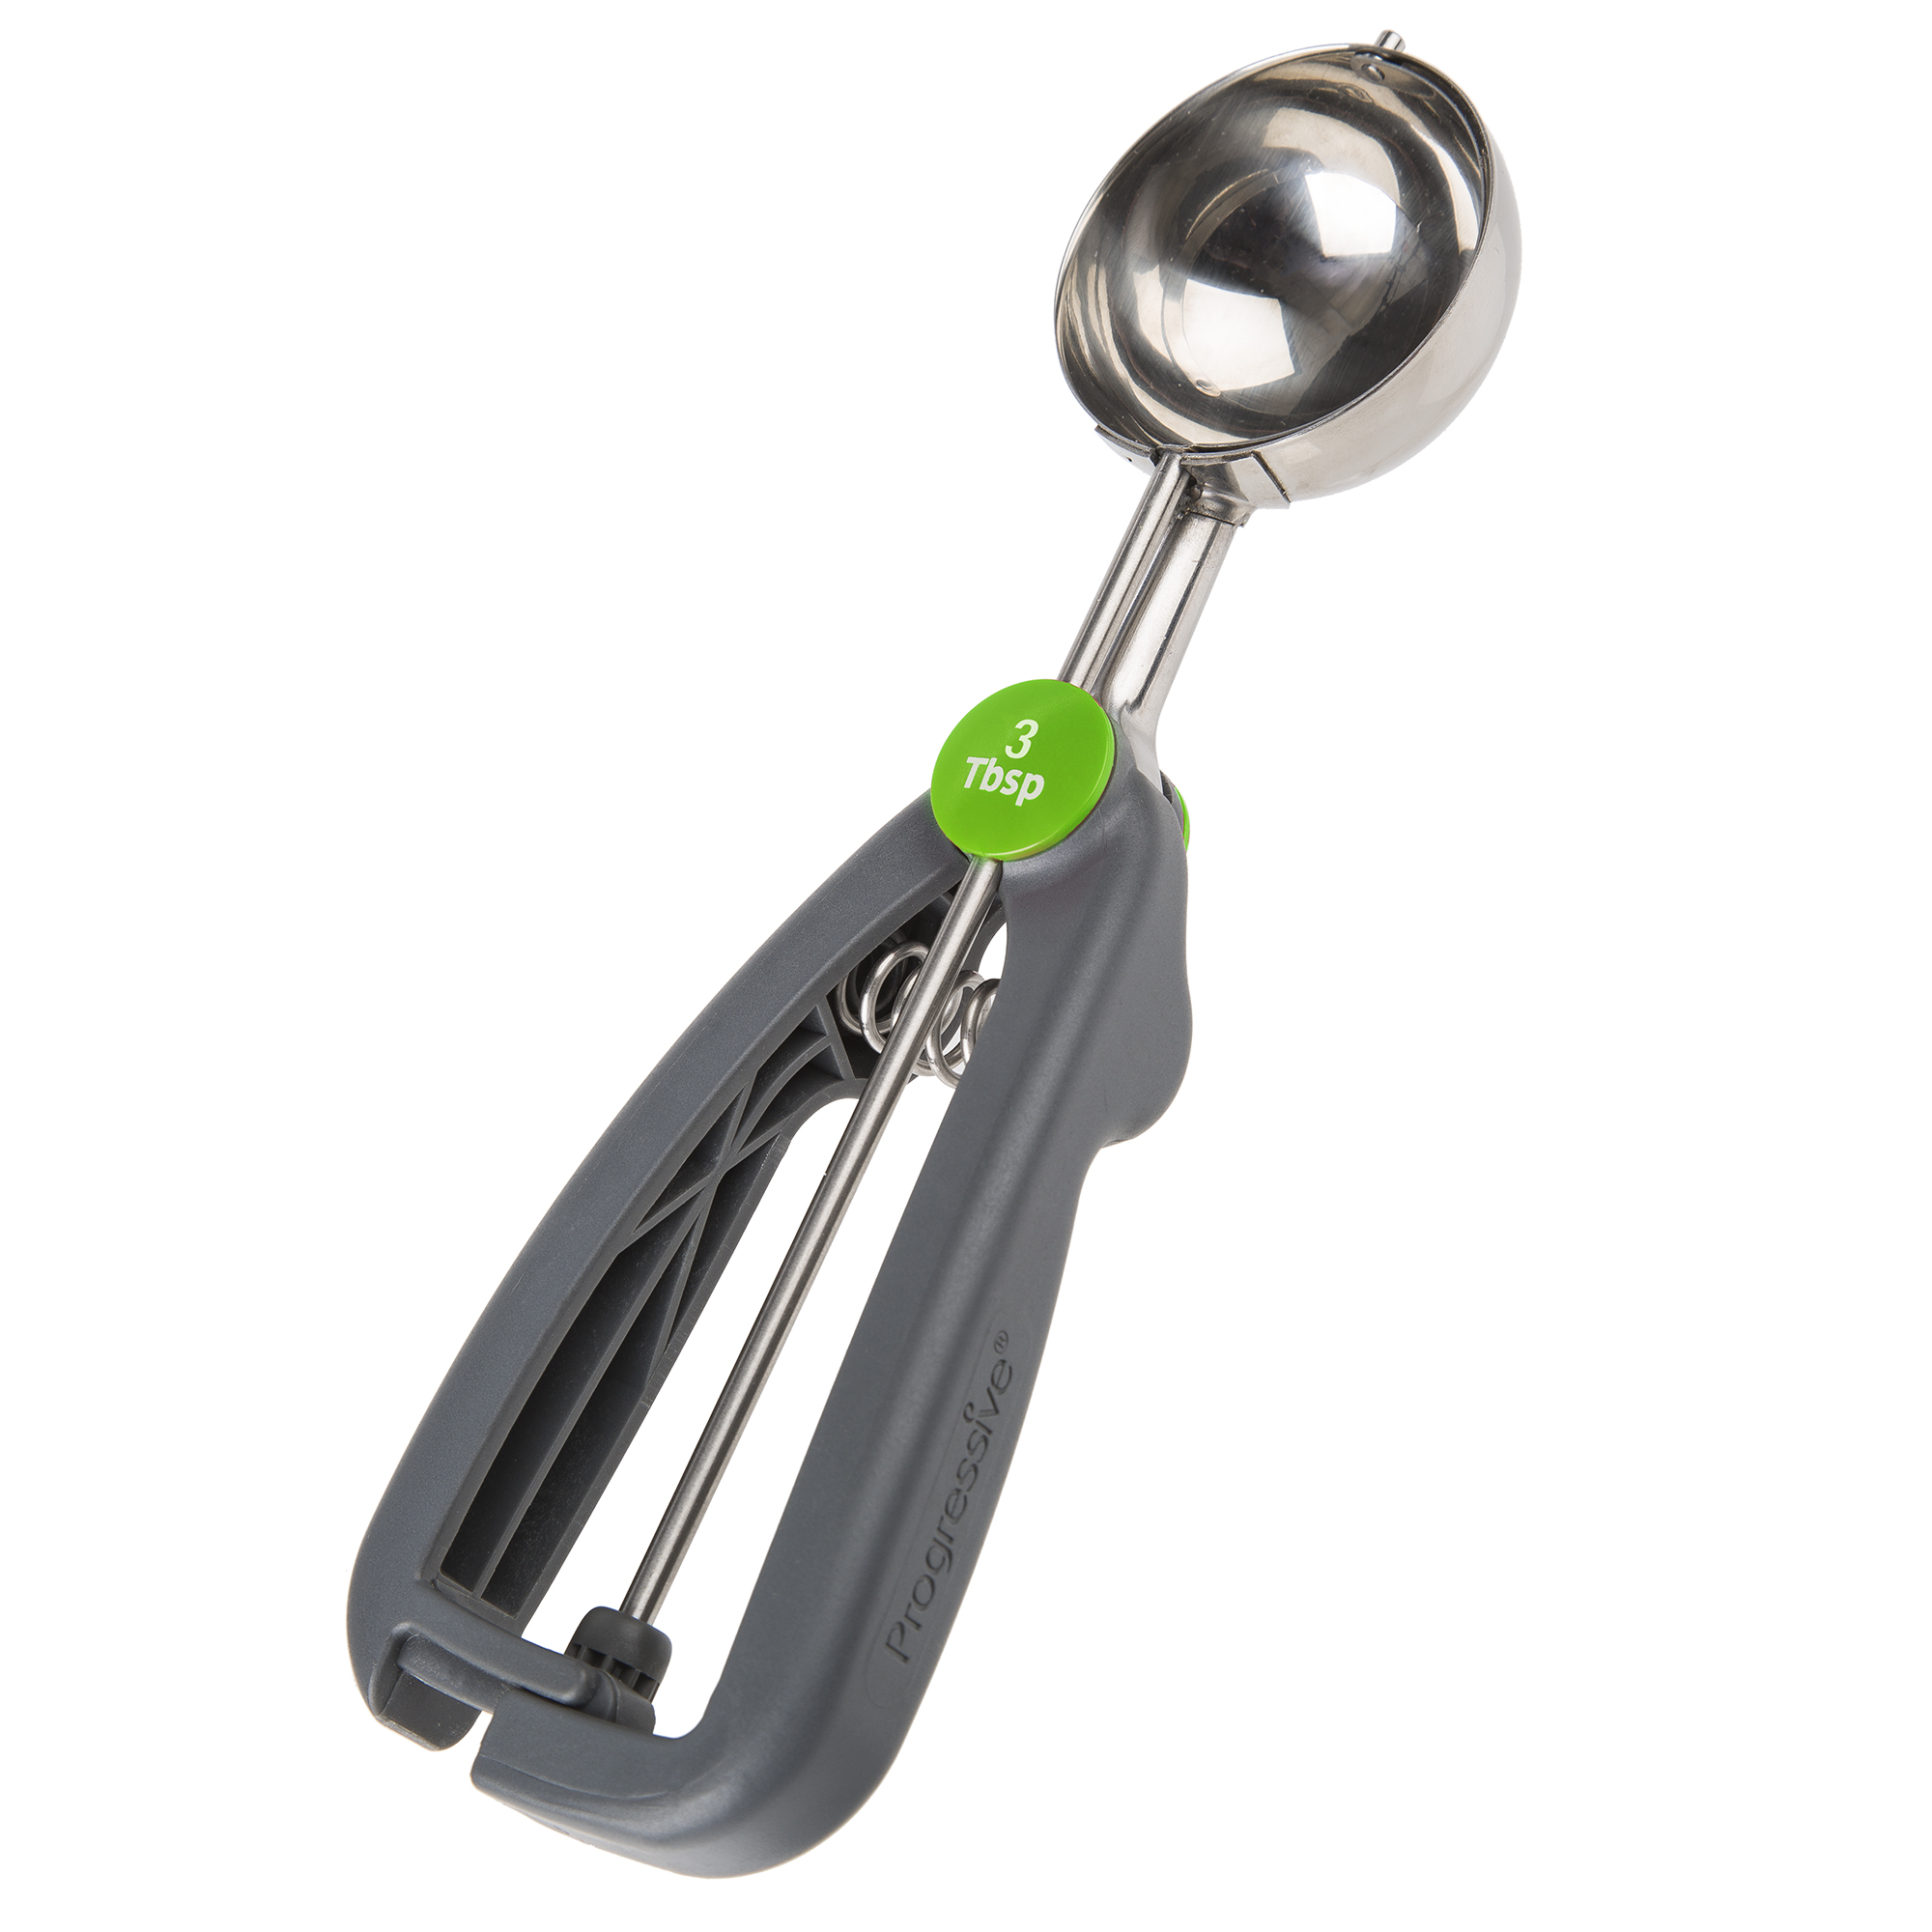 PrepSolutions Quick Release Stainless Steel Cookie Scoop - image 1 of 6